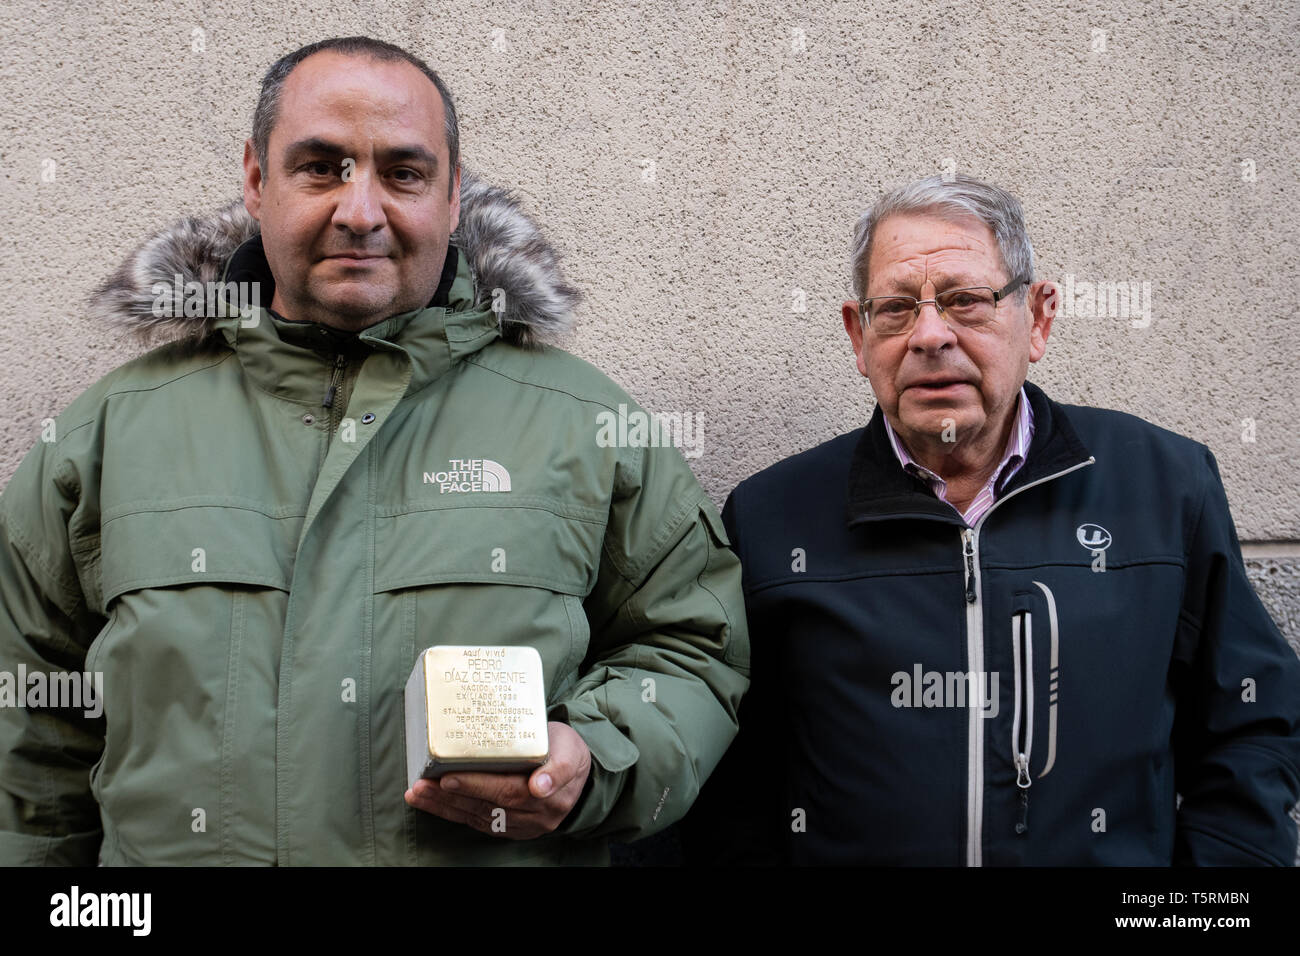 Madrid, Spain. 26th April, 2019. Jorge Diaz (L) and Jose Montañes (R), relatives of Pedro Diaz Clemente holding the Stolperstein in his memory. Stock Photo